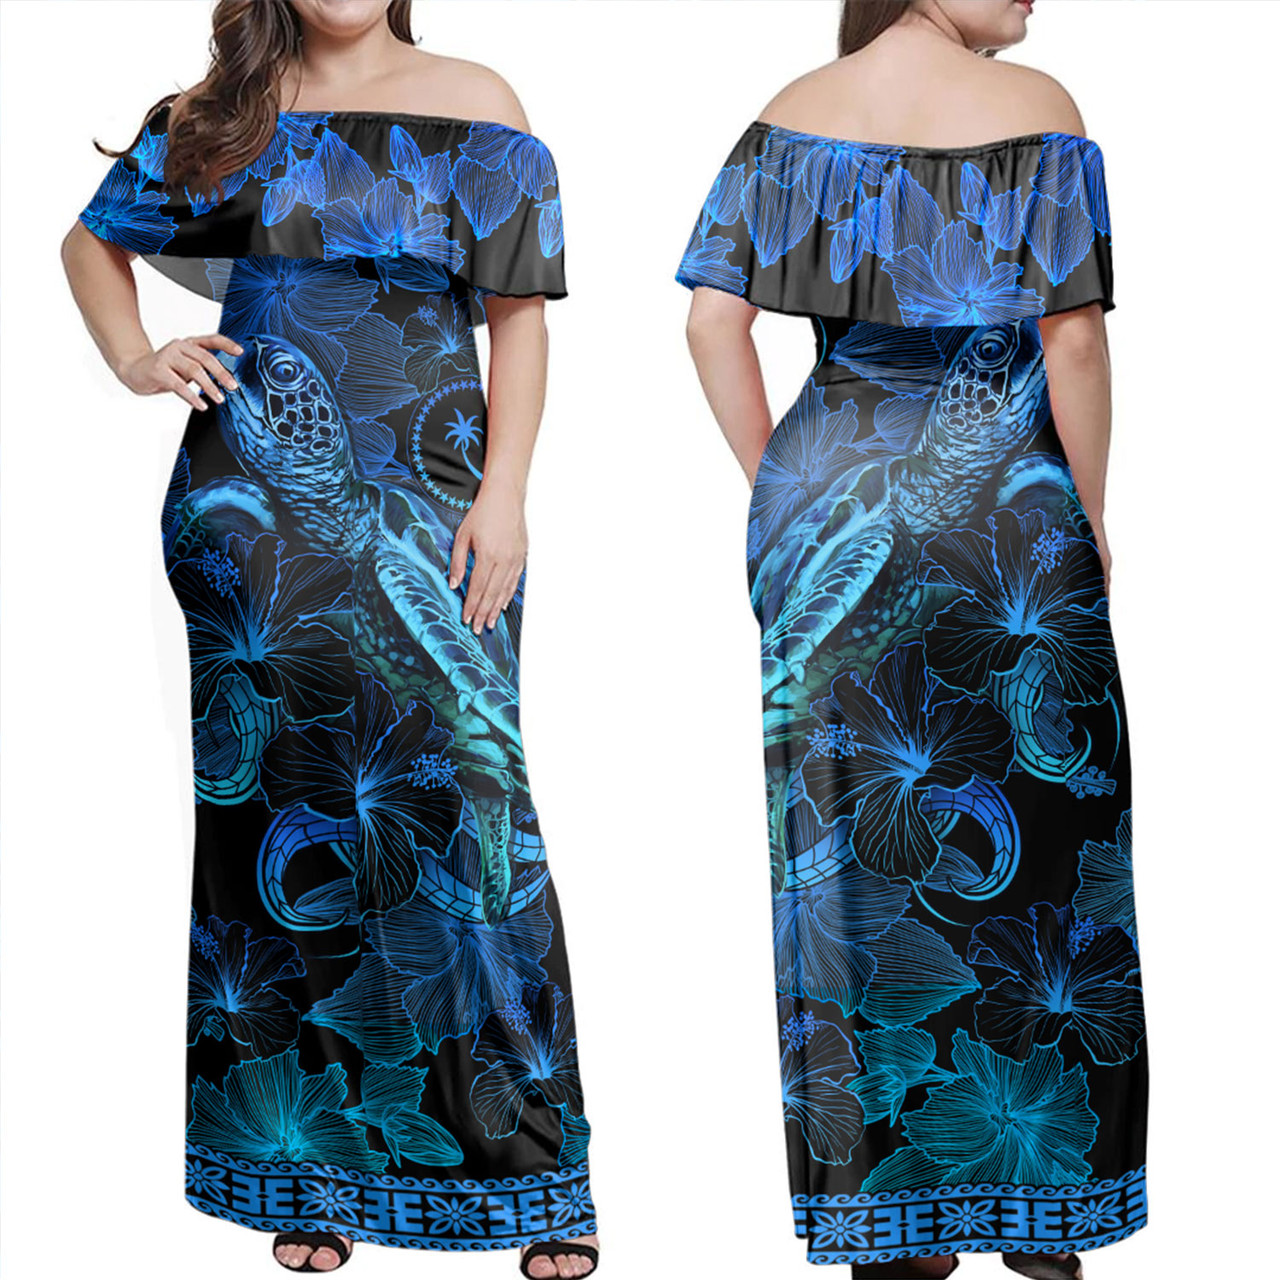 Chuuk State Combo Off Shoulder Long Dress And Shirt Sea Turtle With Blooming Hibiscus Flowers Tribal Blue